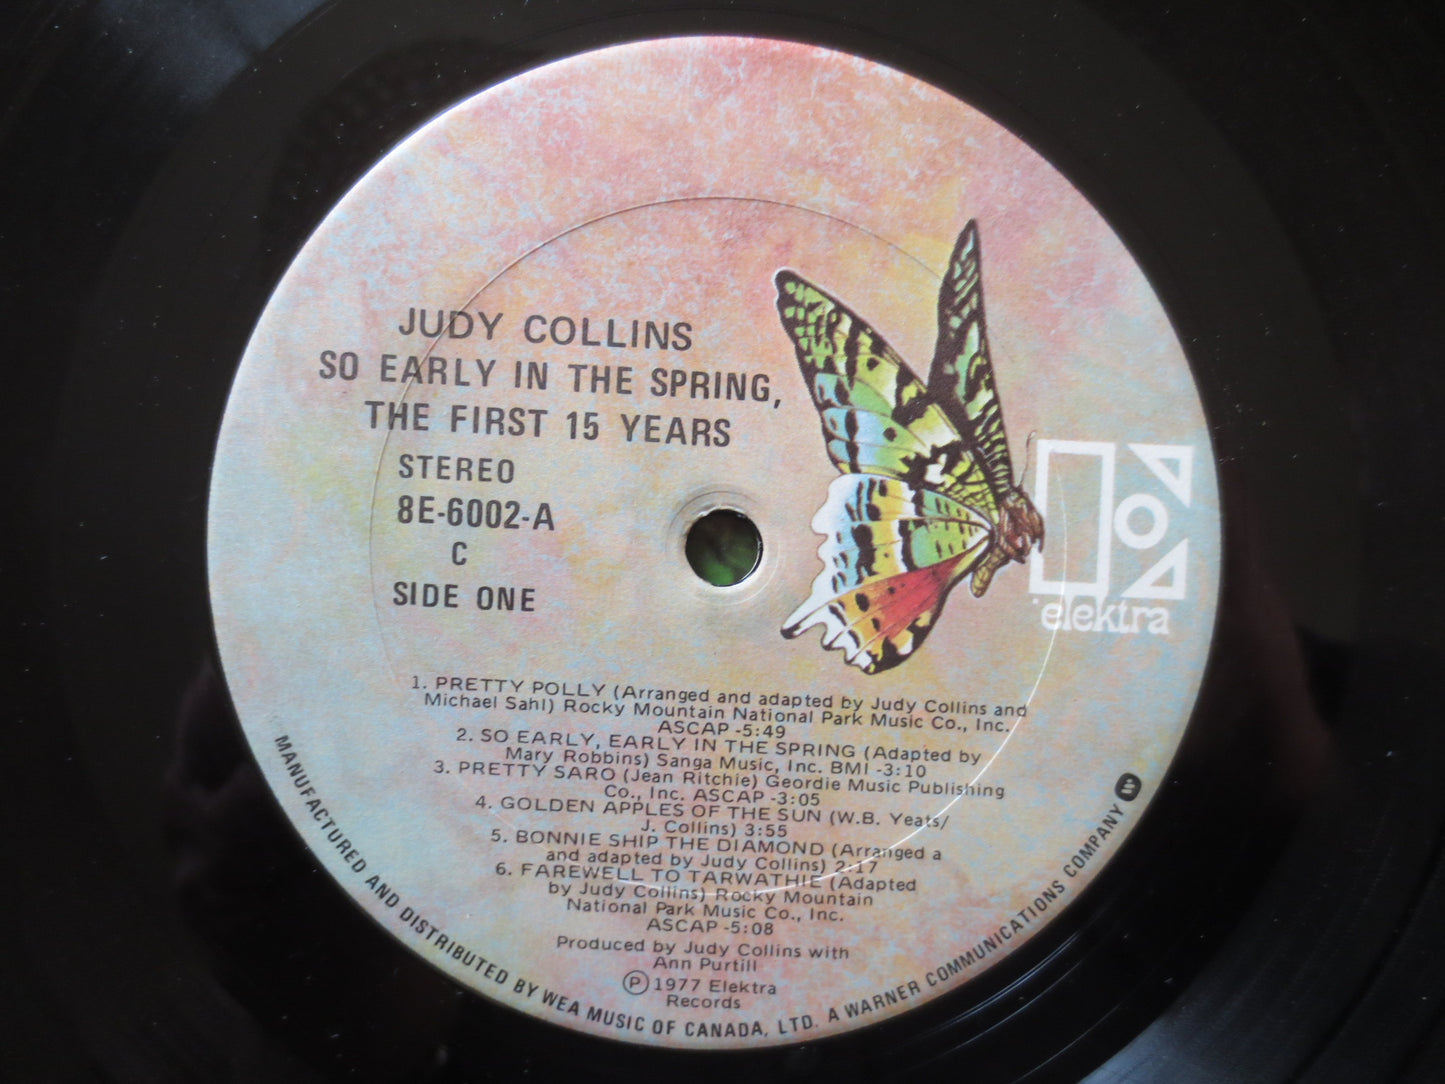 JUDY COLLINS, So Early in the SPRING, Judy Collins Album, Judy Collins Vinyl, Judy Collins Lp, Vinyl Lp, 1977 Records